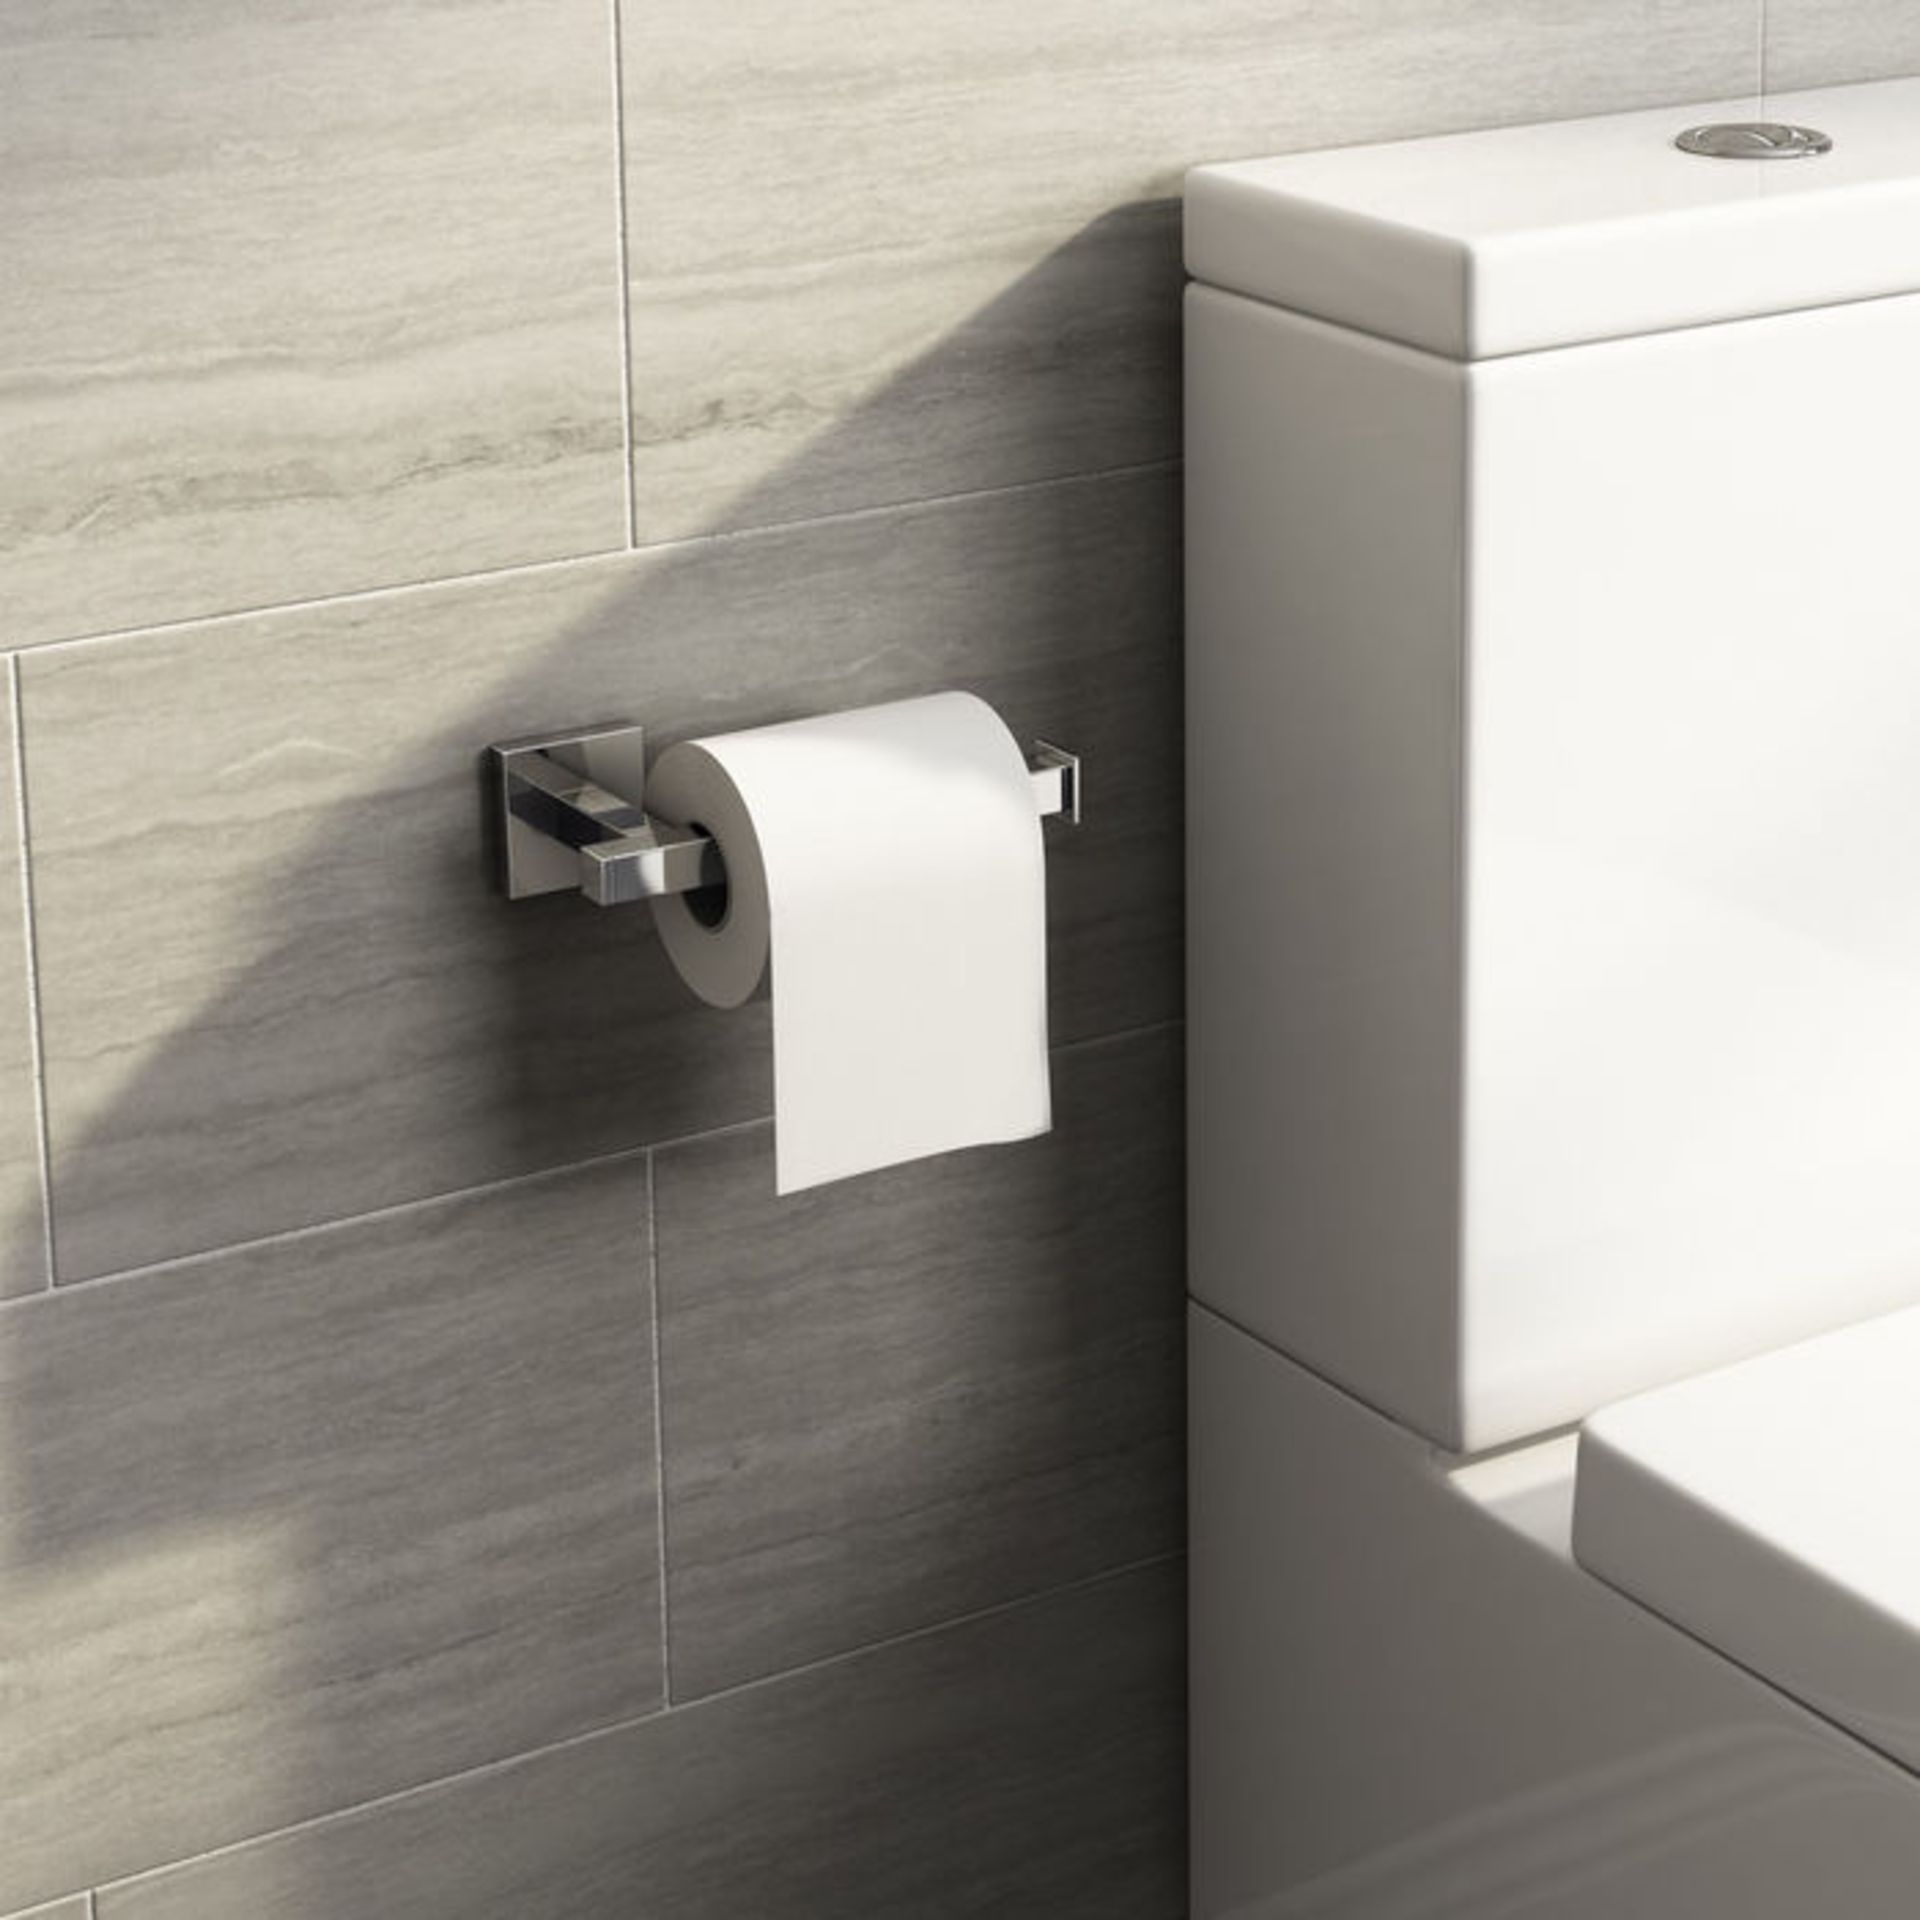 (SP20) Jesmond Toilet Roll Holder Finishes your bathroom with a little extra functionality and style - Image 3 of 3